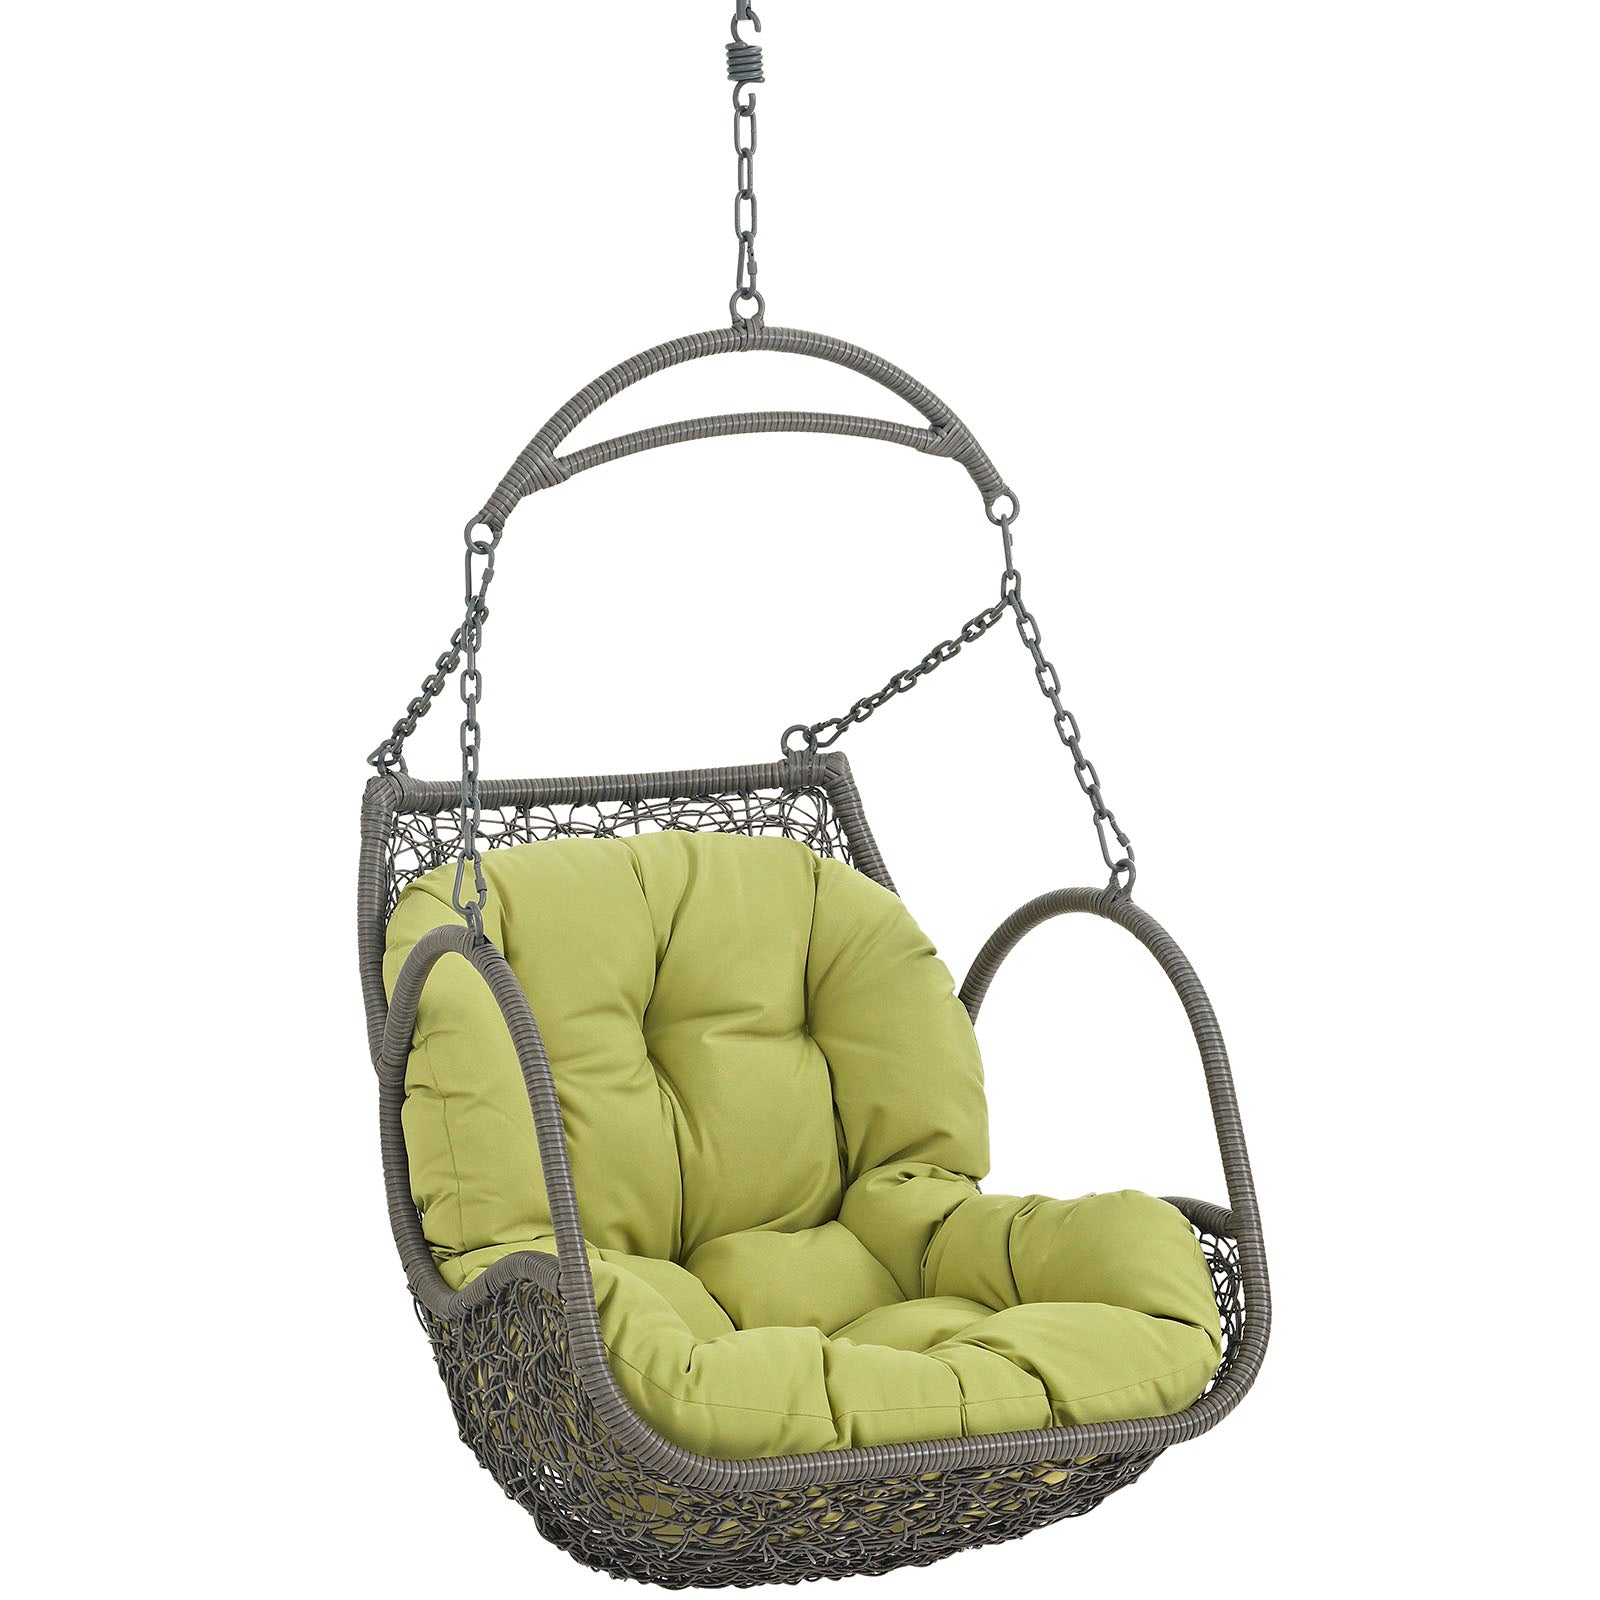 Arbor Outdoor Patio Swing Chair Without Stand - East Shore Modern Home Furnishings